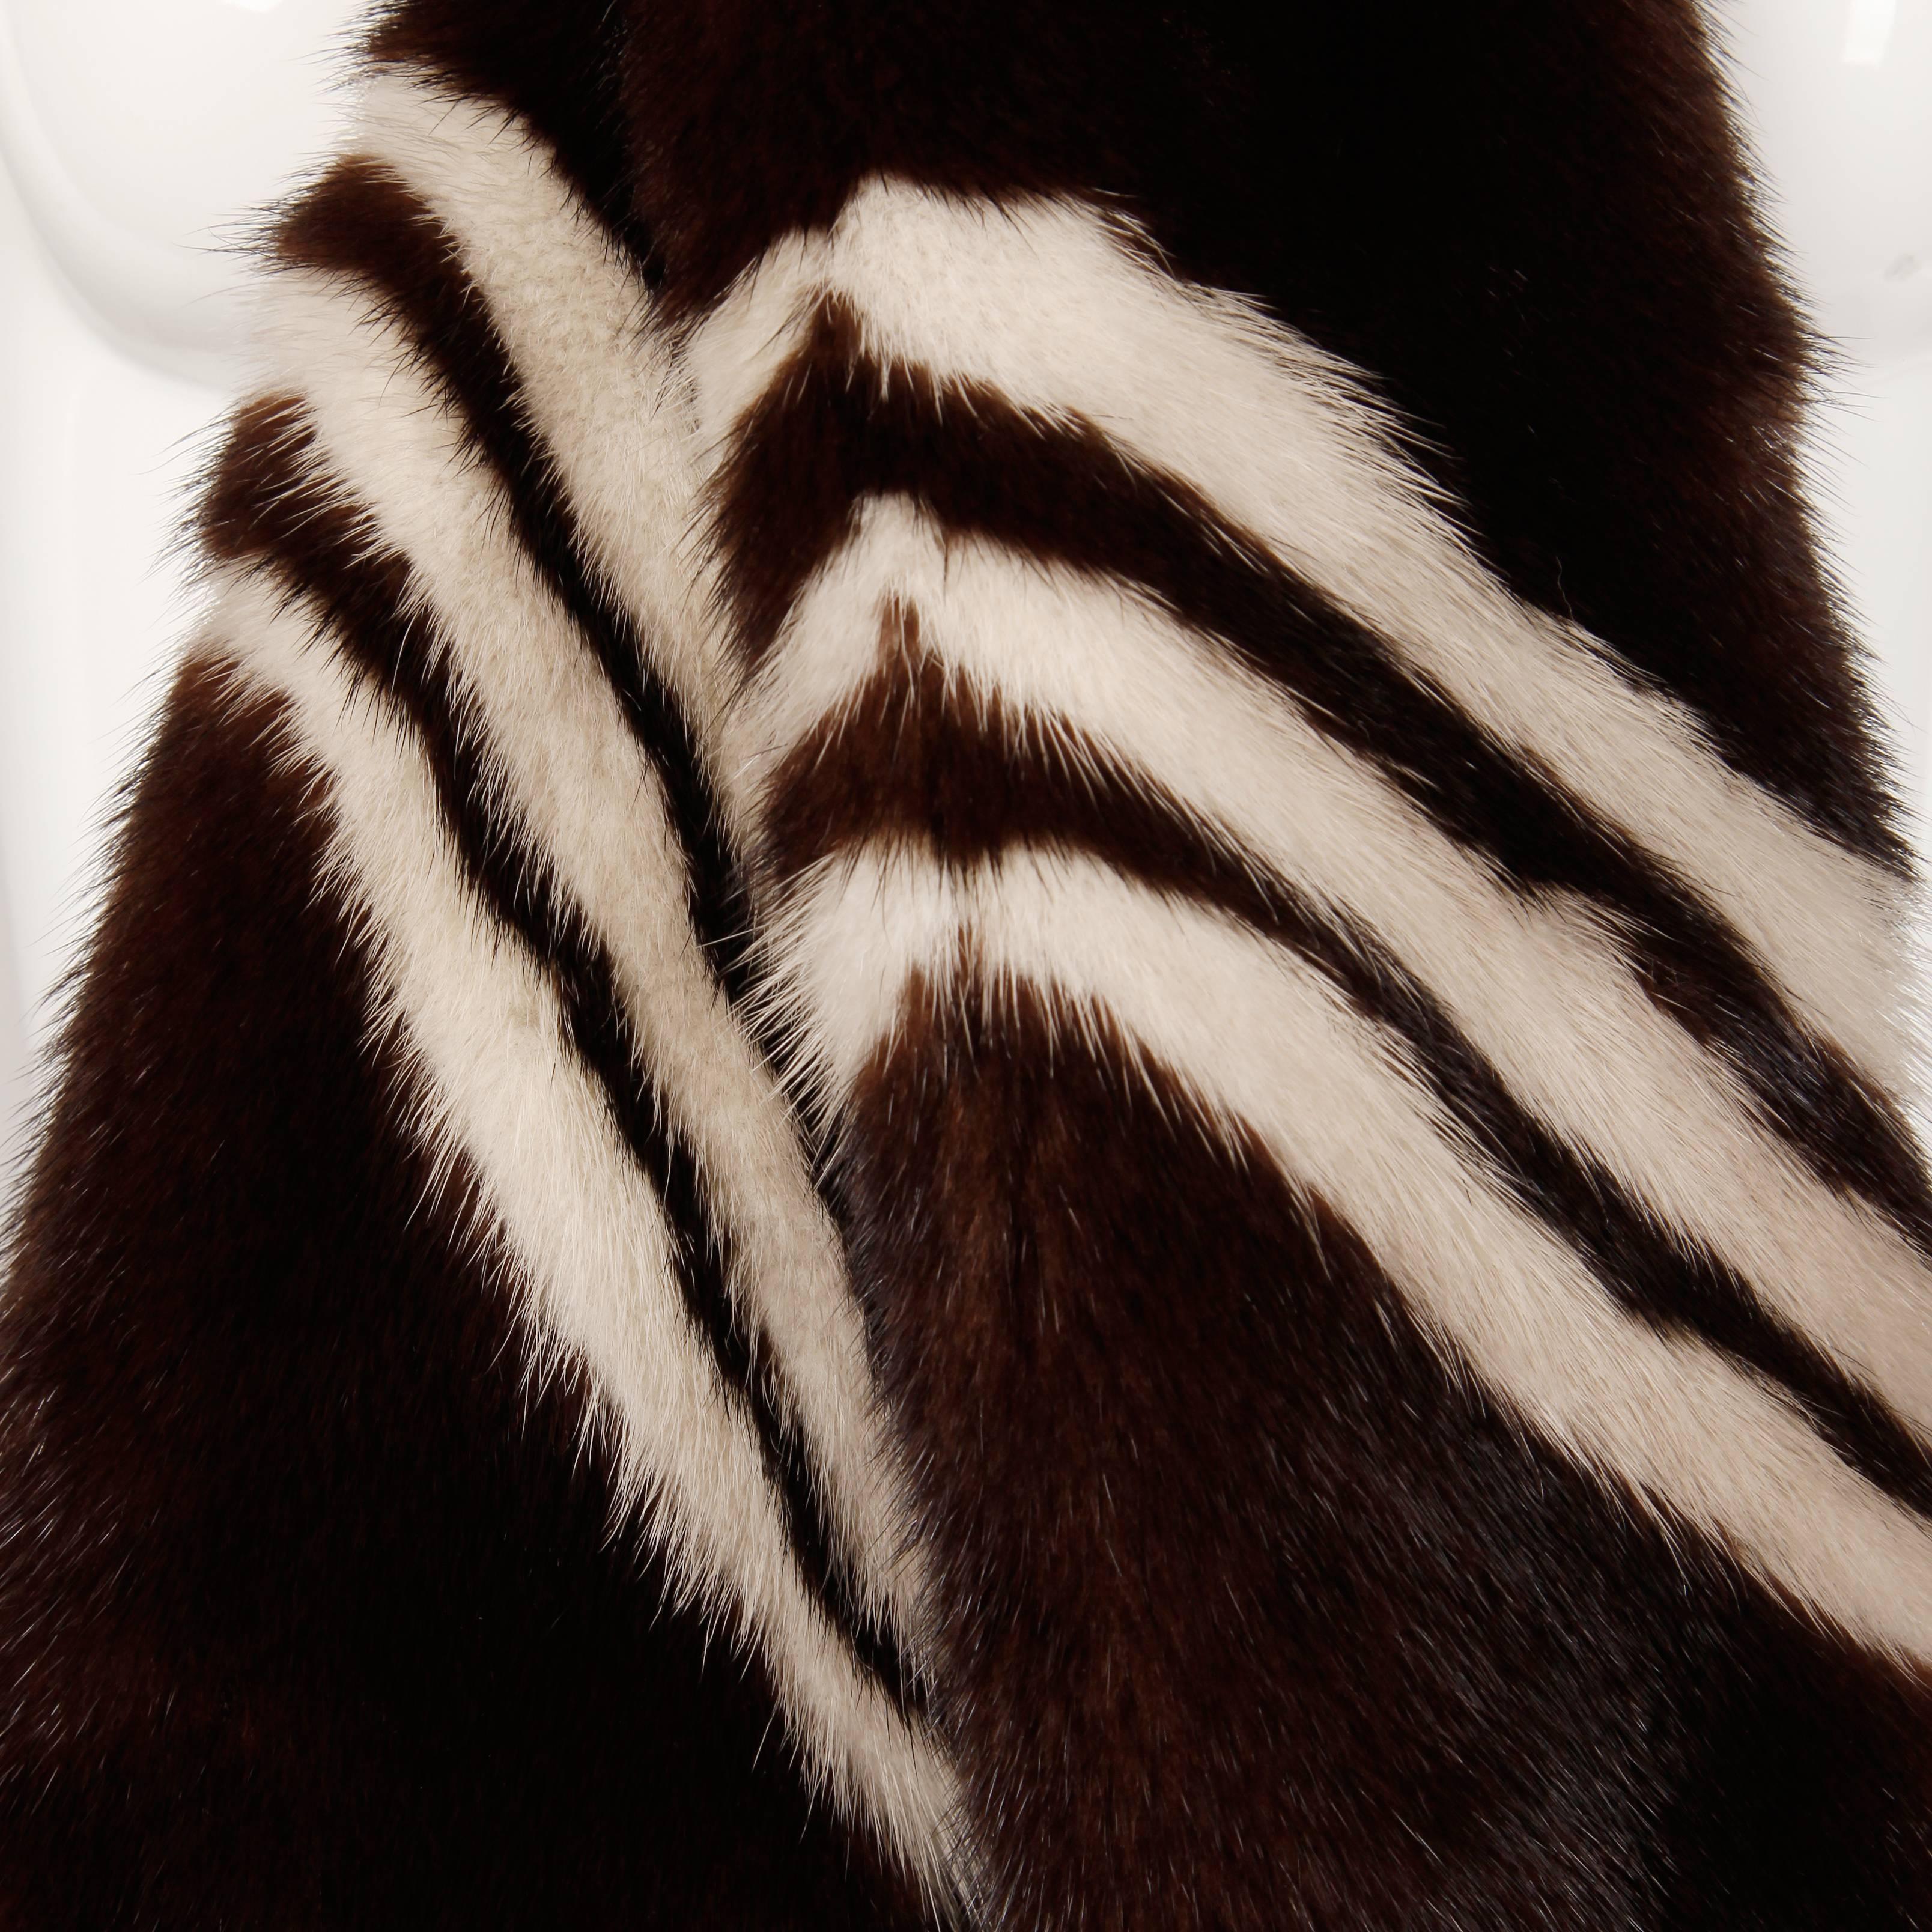 Women's Vintage Brown + Blonde Striped Mink Fur Wrap, Fling, Stole or Scarf with Tails